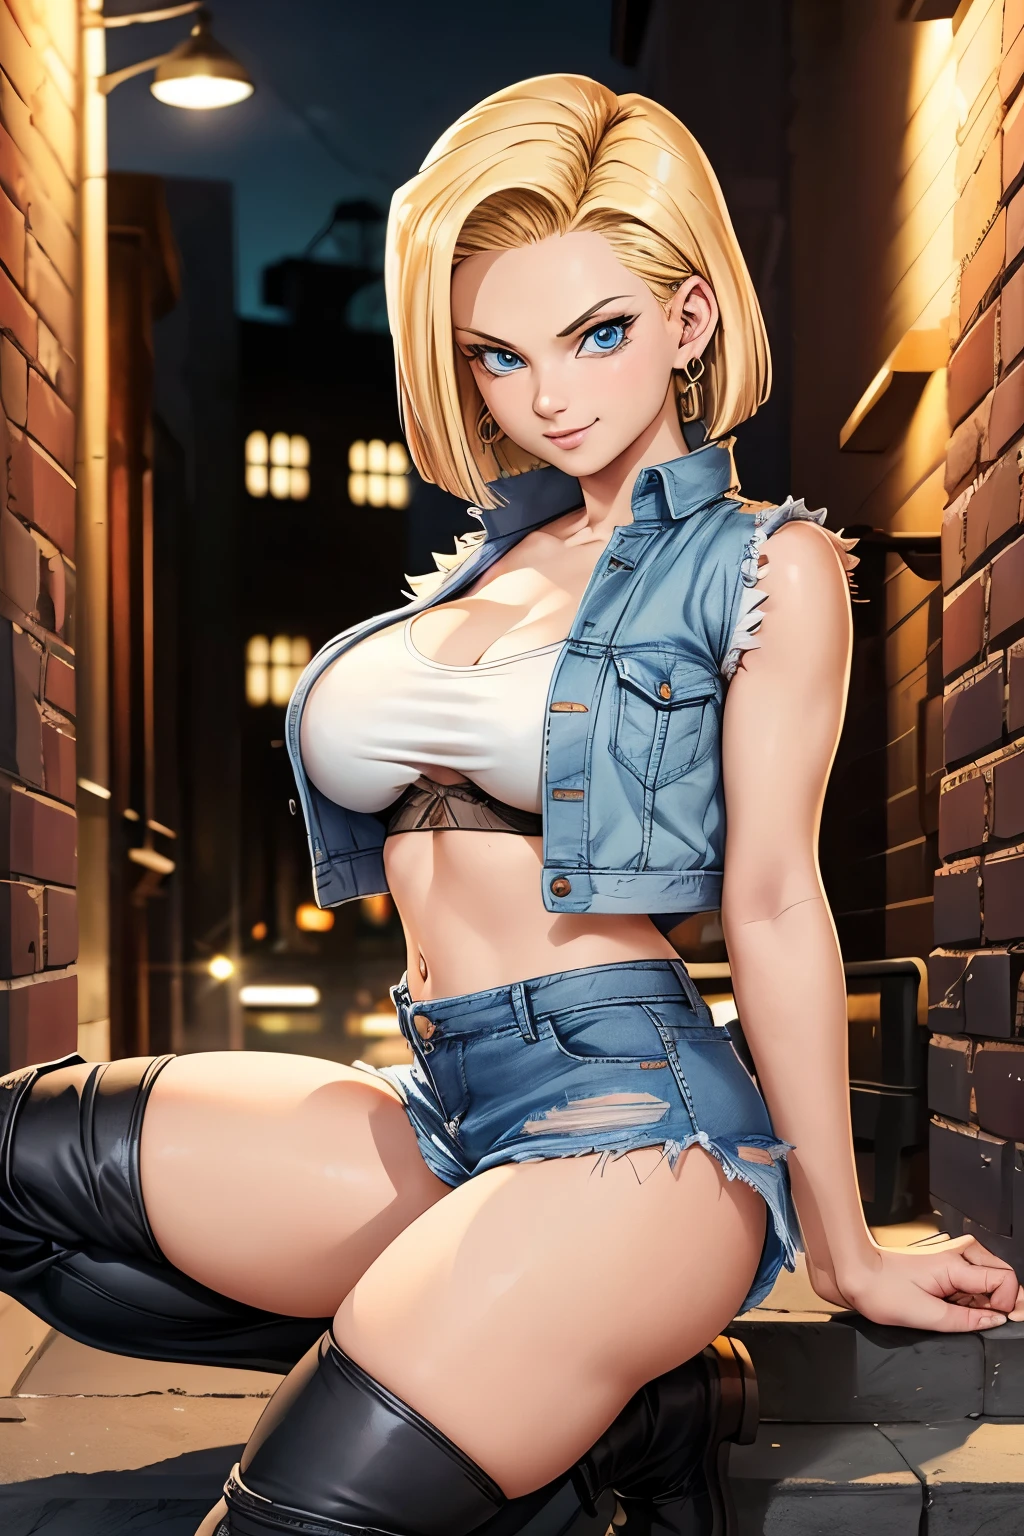 Best Quality, Android 18, Solo, Blonde hair, Blue eyes, Short hair, A smile, earrings, Jewelry, Denim Vest, open vest, black bra, Denim miniskirt, Black knee-high boots, huge breasts, buttocks sticking out, Street, night